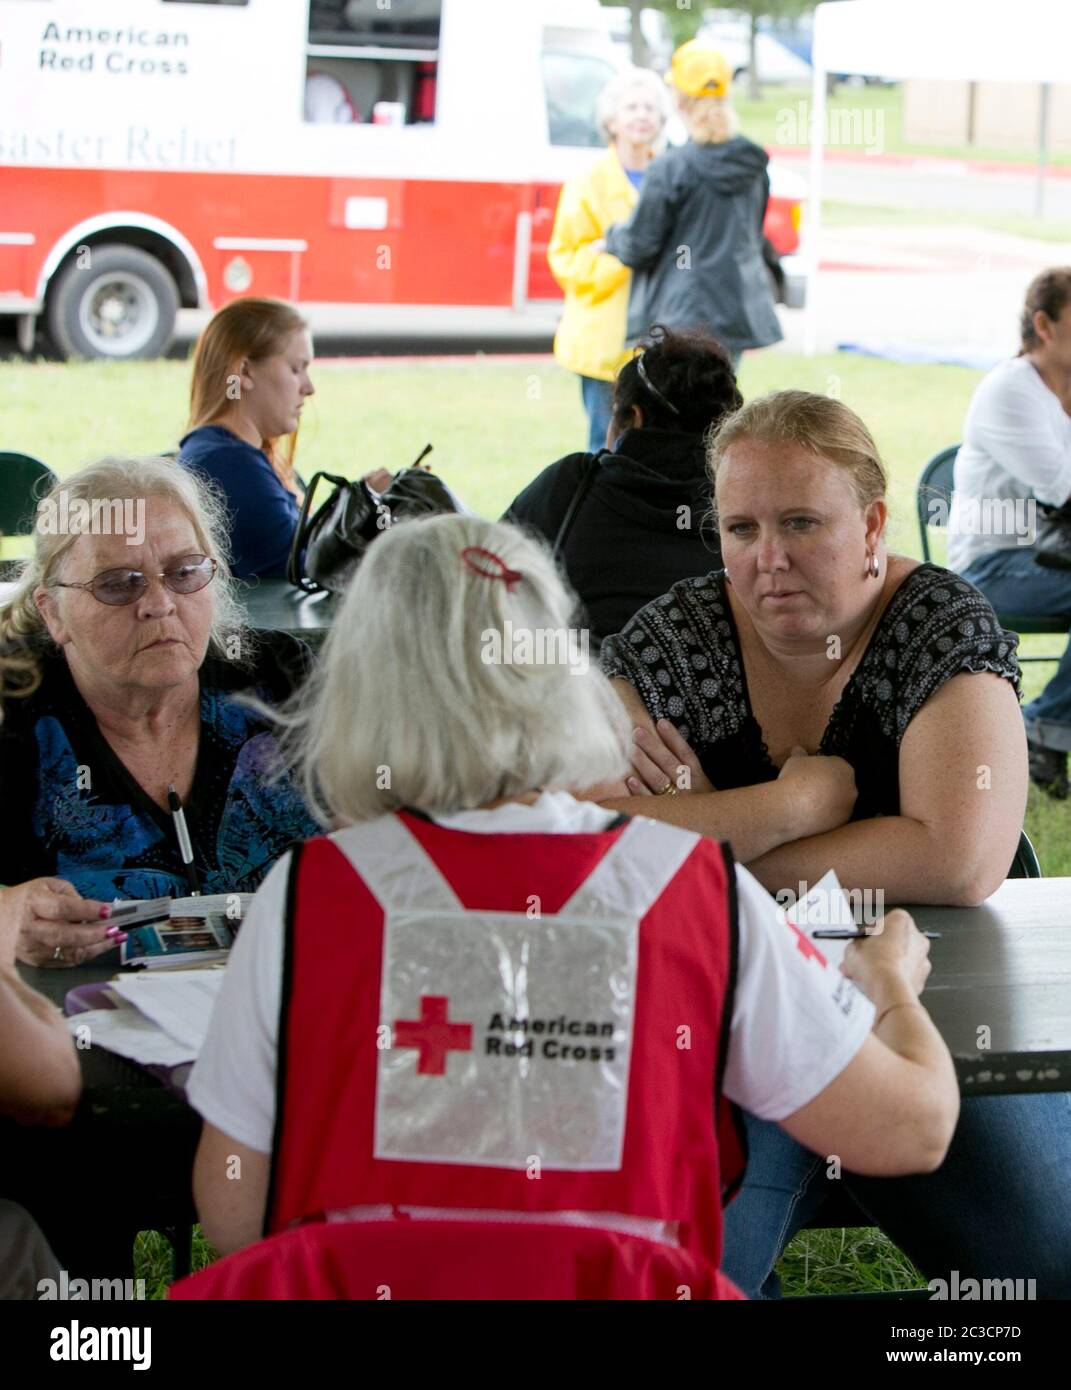 Austin, Texas USA, November 5, 2013: Volunteers from the American Red Cross help victims of a flash flood on Onion Creek. On October 31st, a deadly flash flood ripped though the area, leaving hundreds of homes damaged and several people dead. The group set up tents, tables and chairs where volunteers helped connect victims to various forms of assistance. ©Marjorie Kamys Cotera/Daemmrich Stock Photo